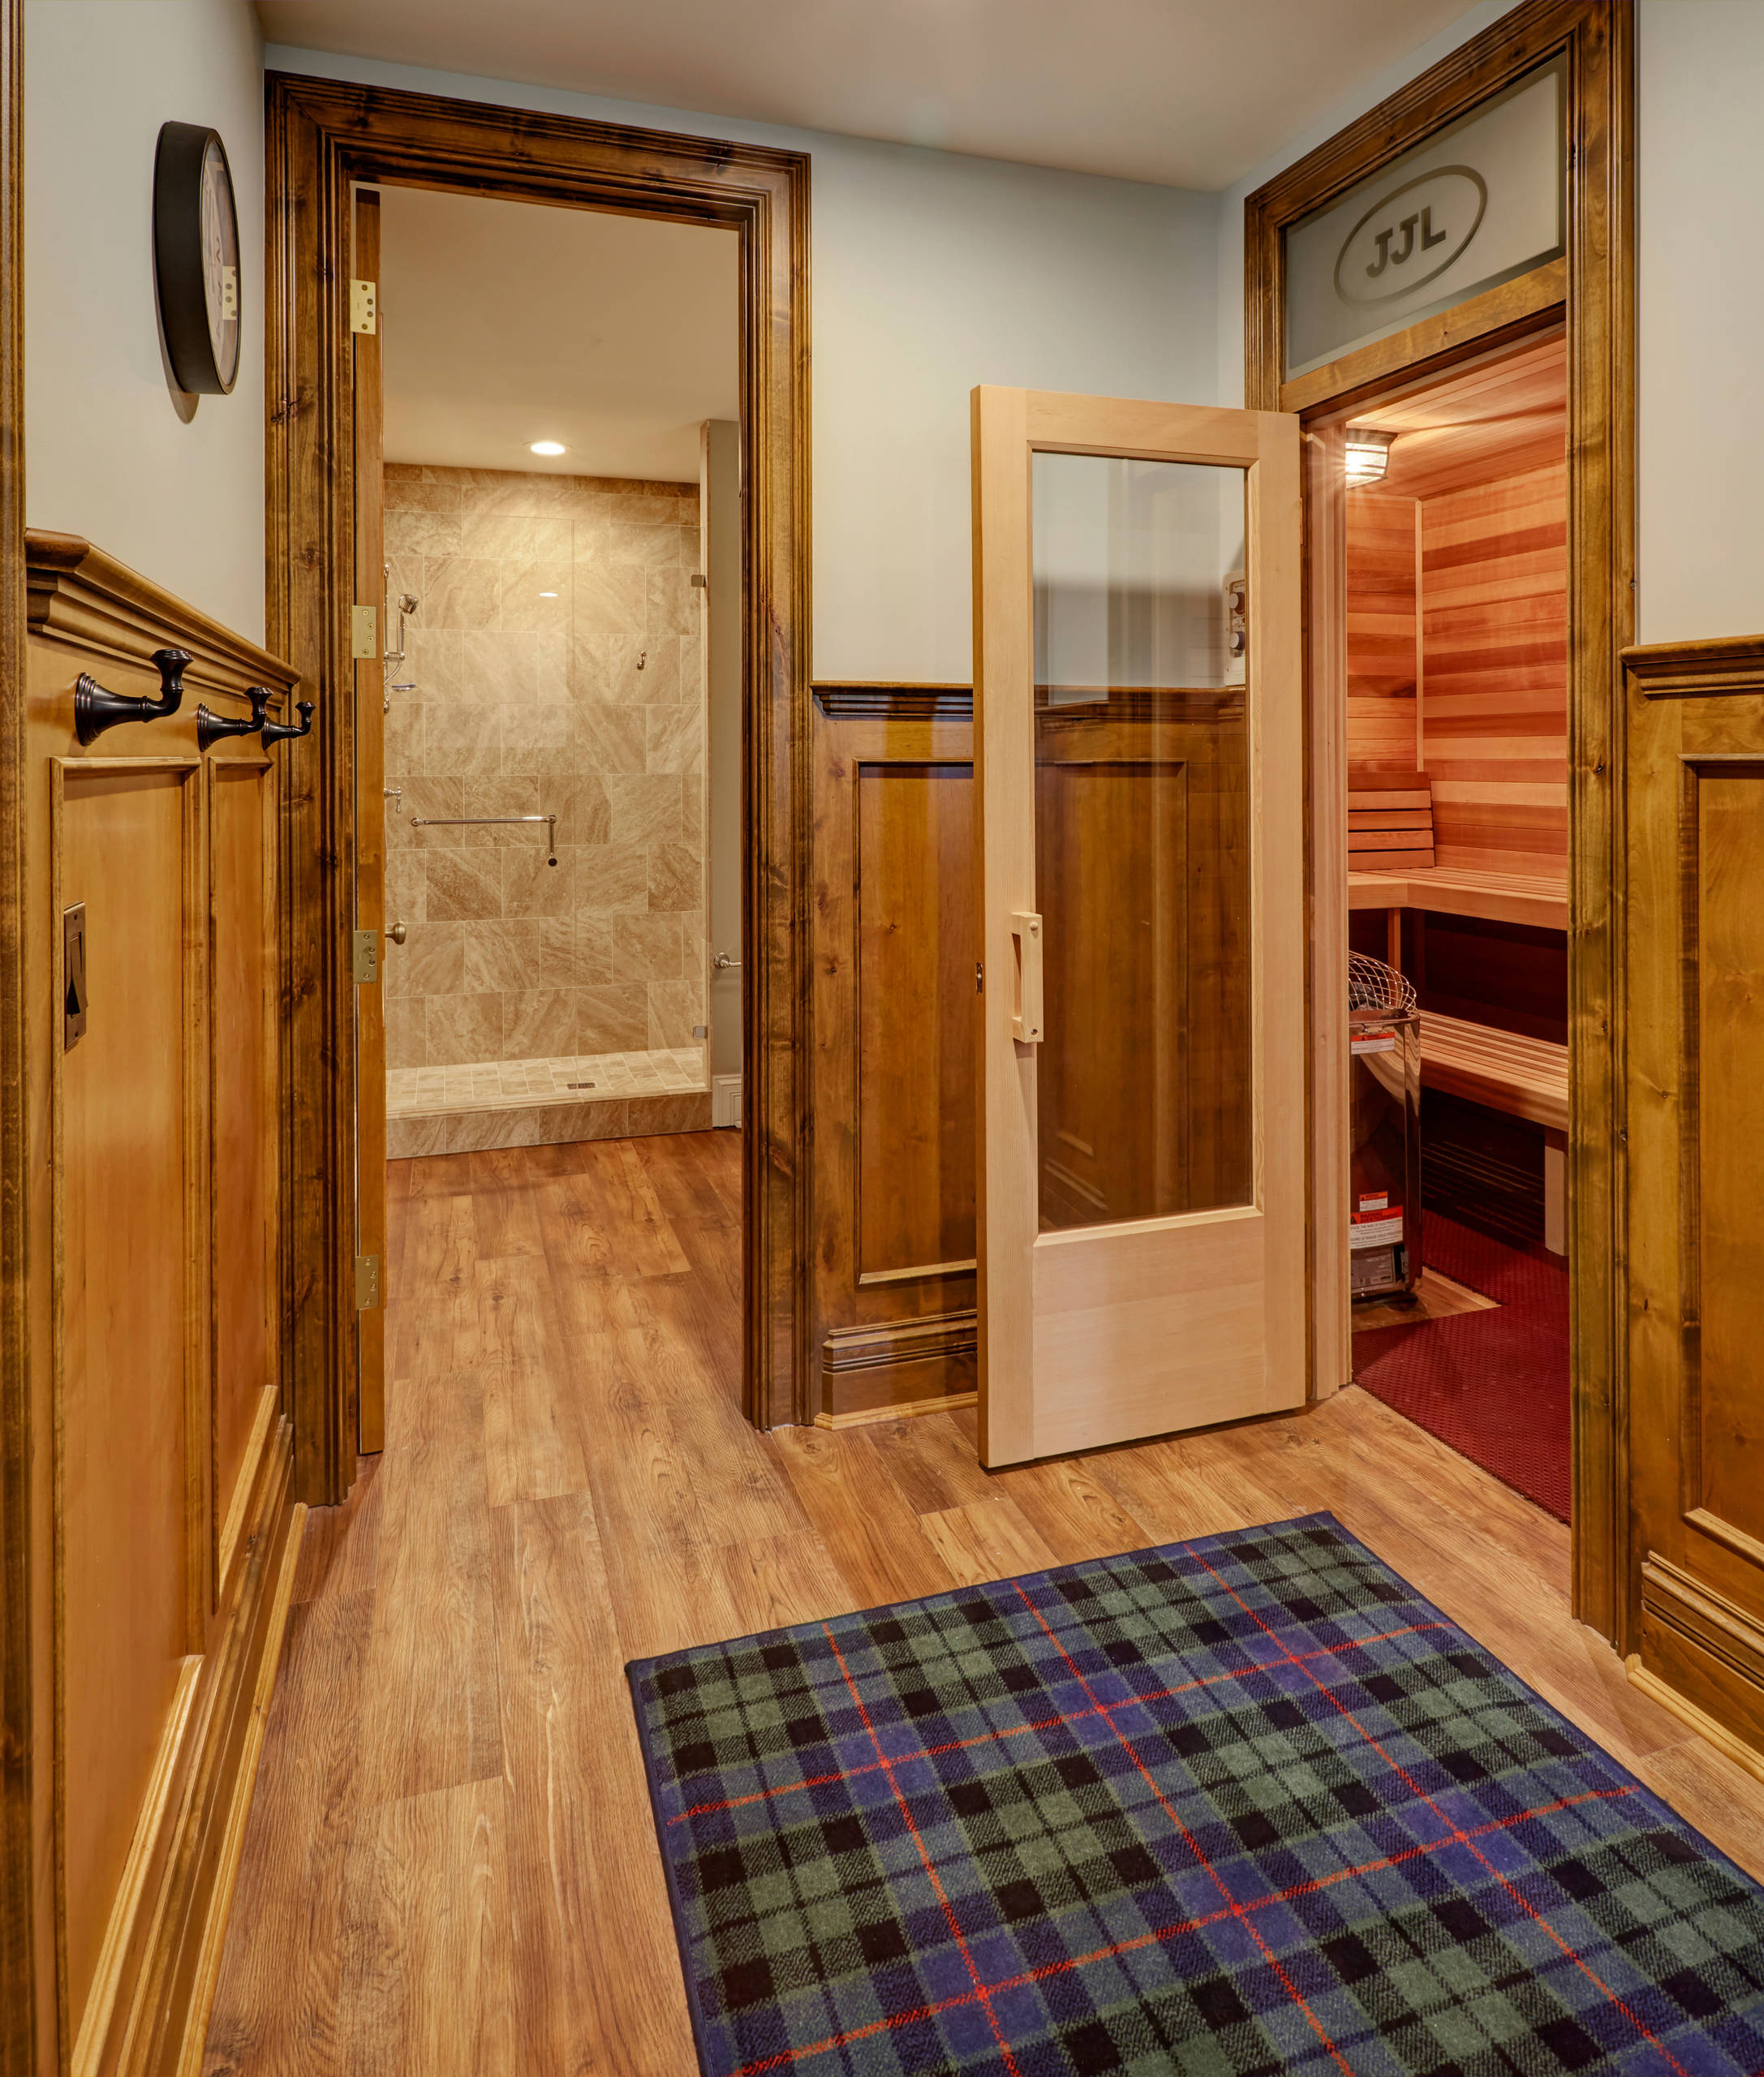 Lower Level Sauna and Shower with Knotty Alder Wainscoting - Traditional -  Basement - Milwaukee - by Orren Pickell Building Group | Houzz